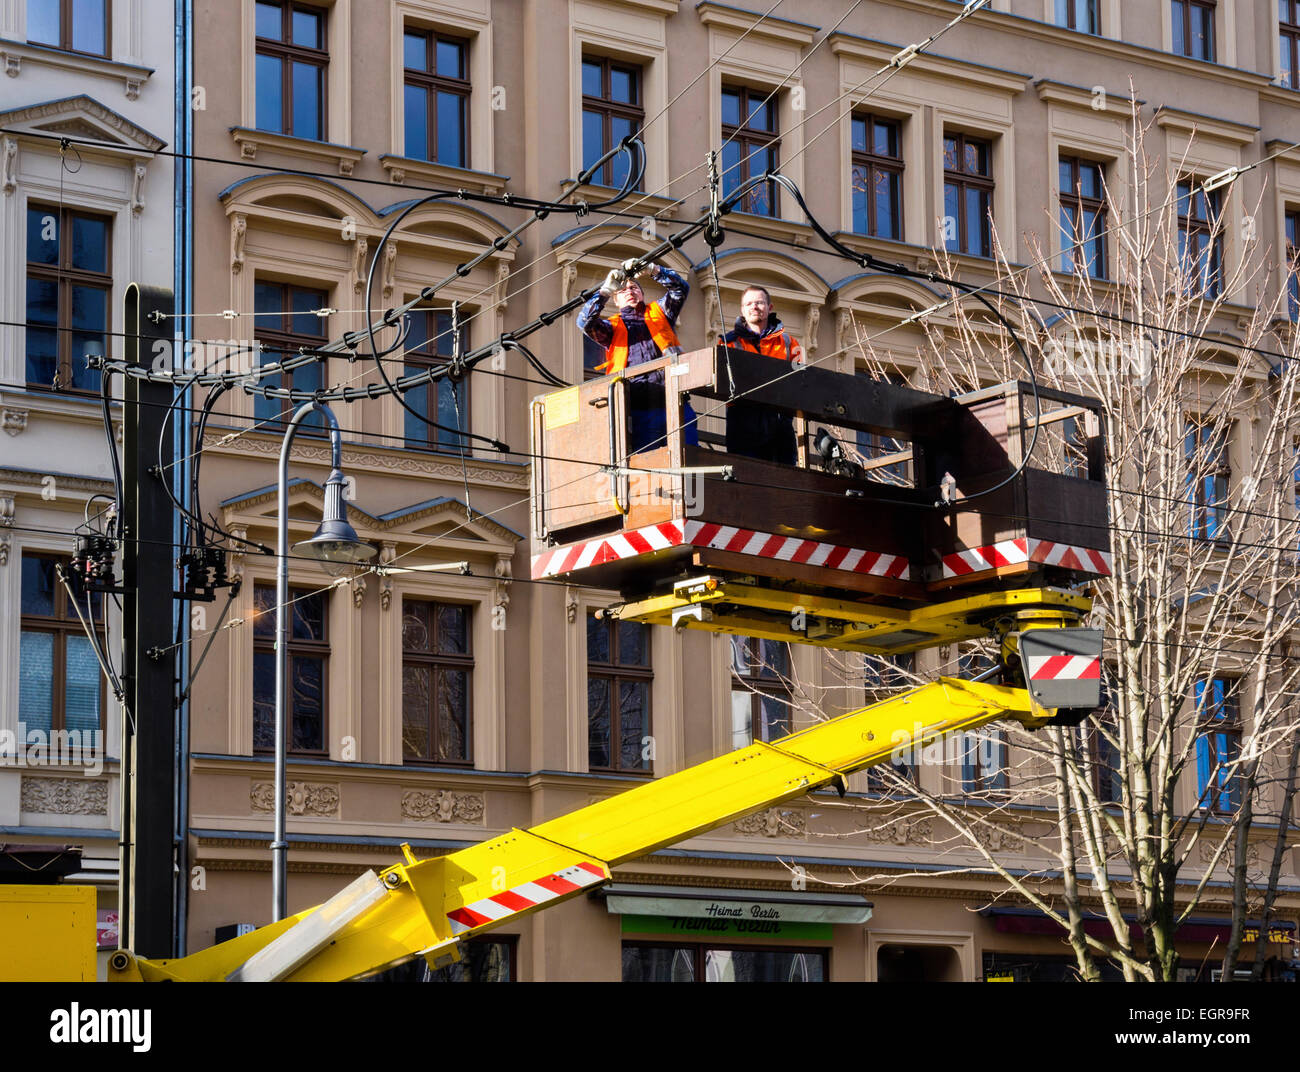 Berlin tram repair and safety service - truck and two engineers repairing overhead tram wires, Germany Stock Photo